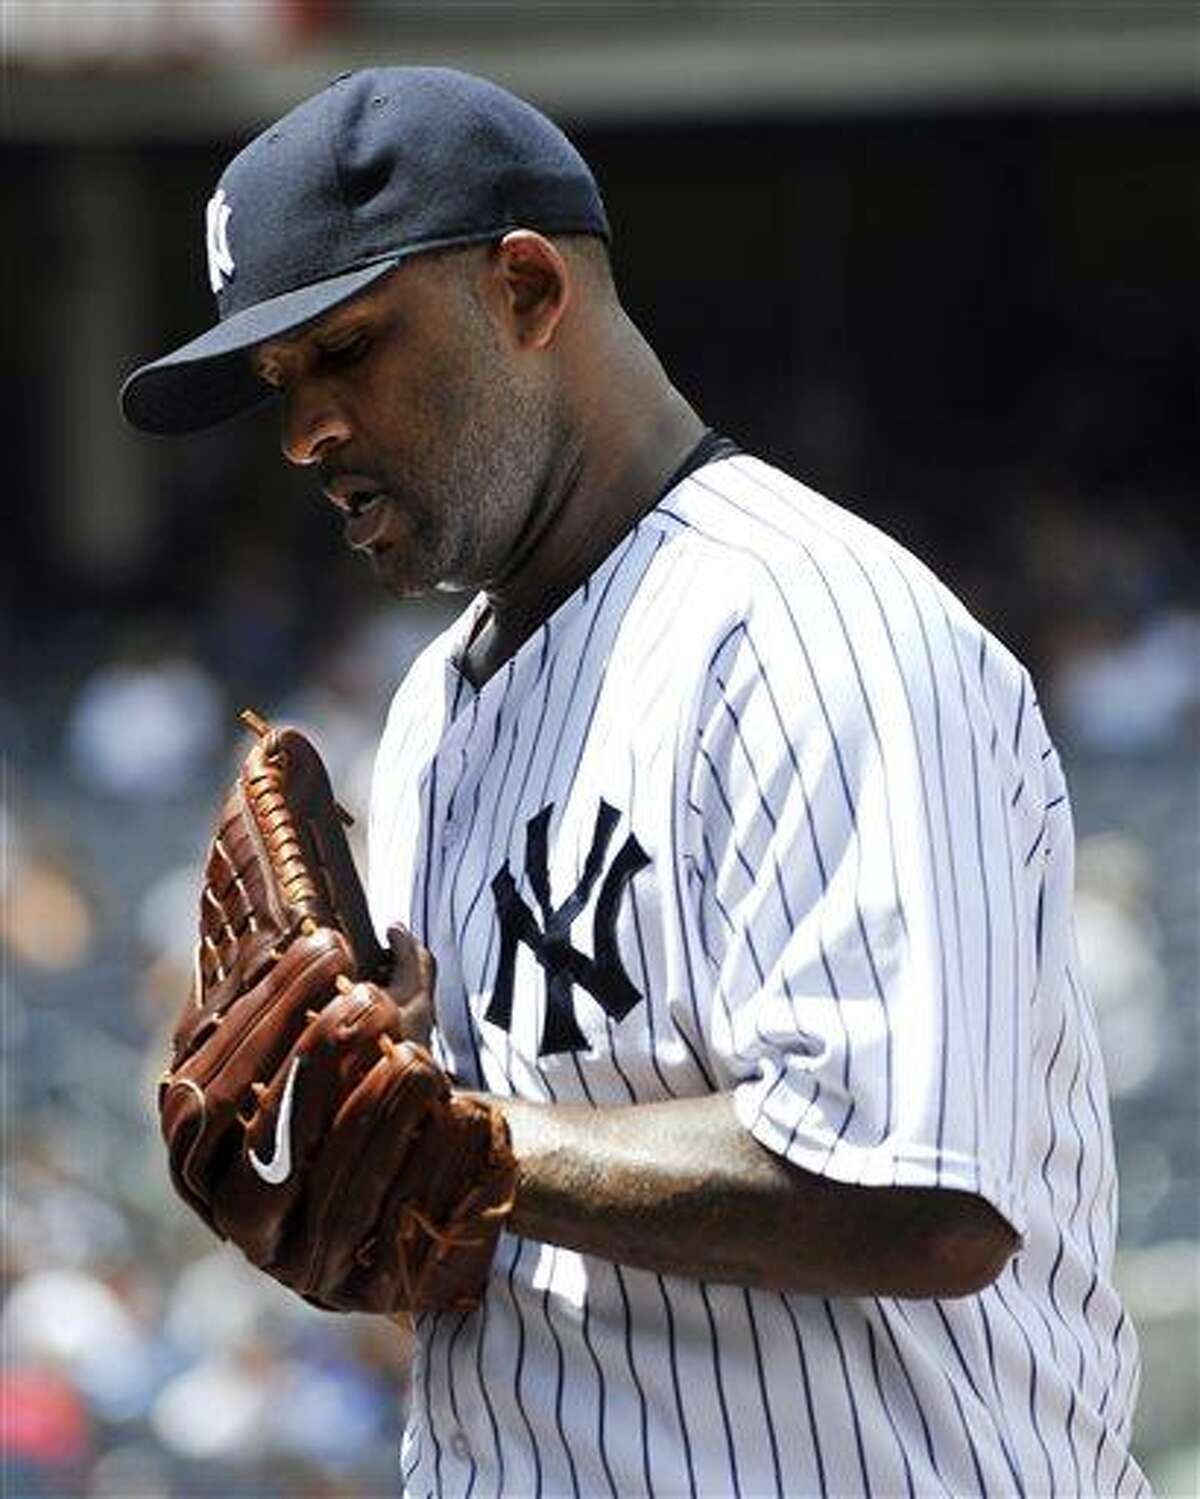 New York Yankees starting pitcher CC Sabathia walks off the field at the top of the third inning after giving up a three-run home run to Minnesota Twins' Aaron Hicks in a baseball game at Yankee Stadium on Sunday, July 14, 2013 in New York. The Twins won 10-4. (AP Photo/Kathy Kmonicek)